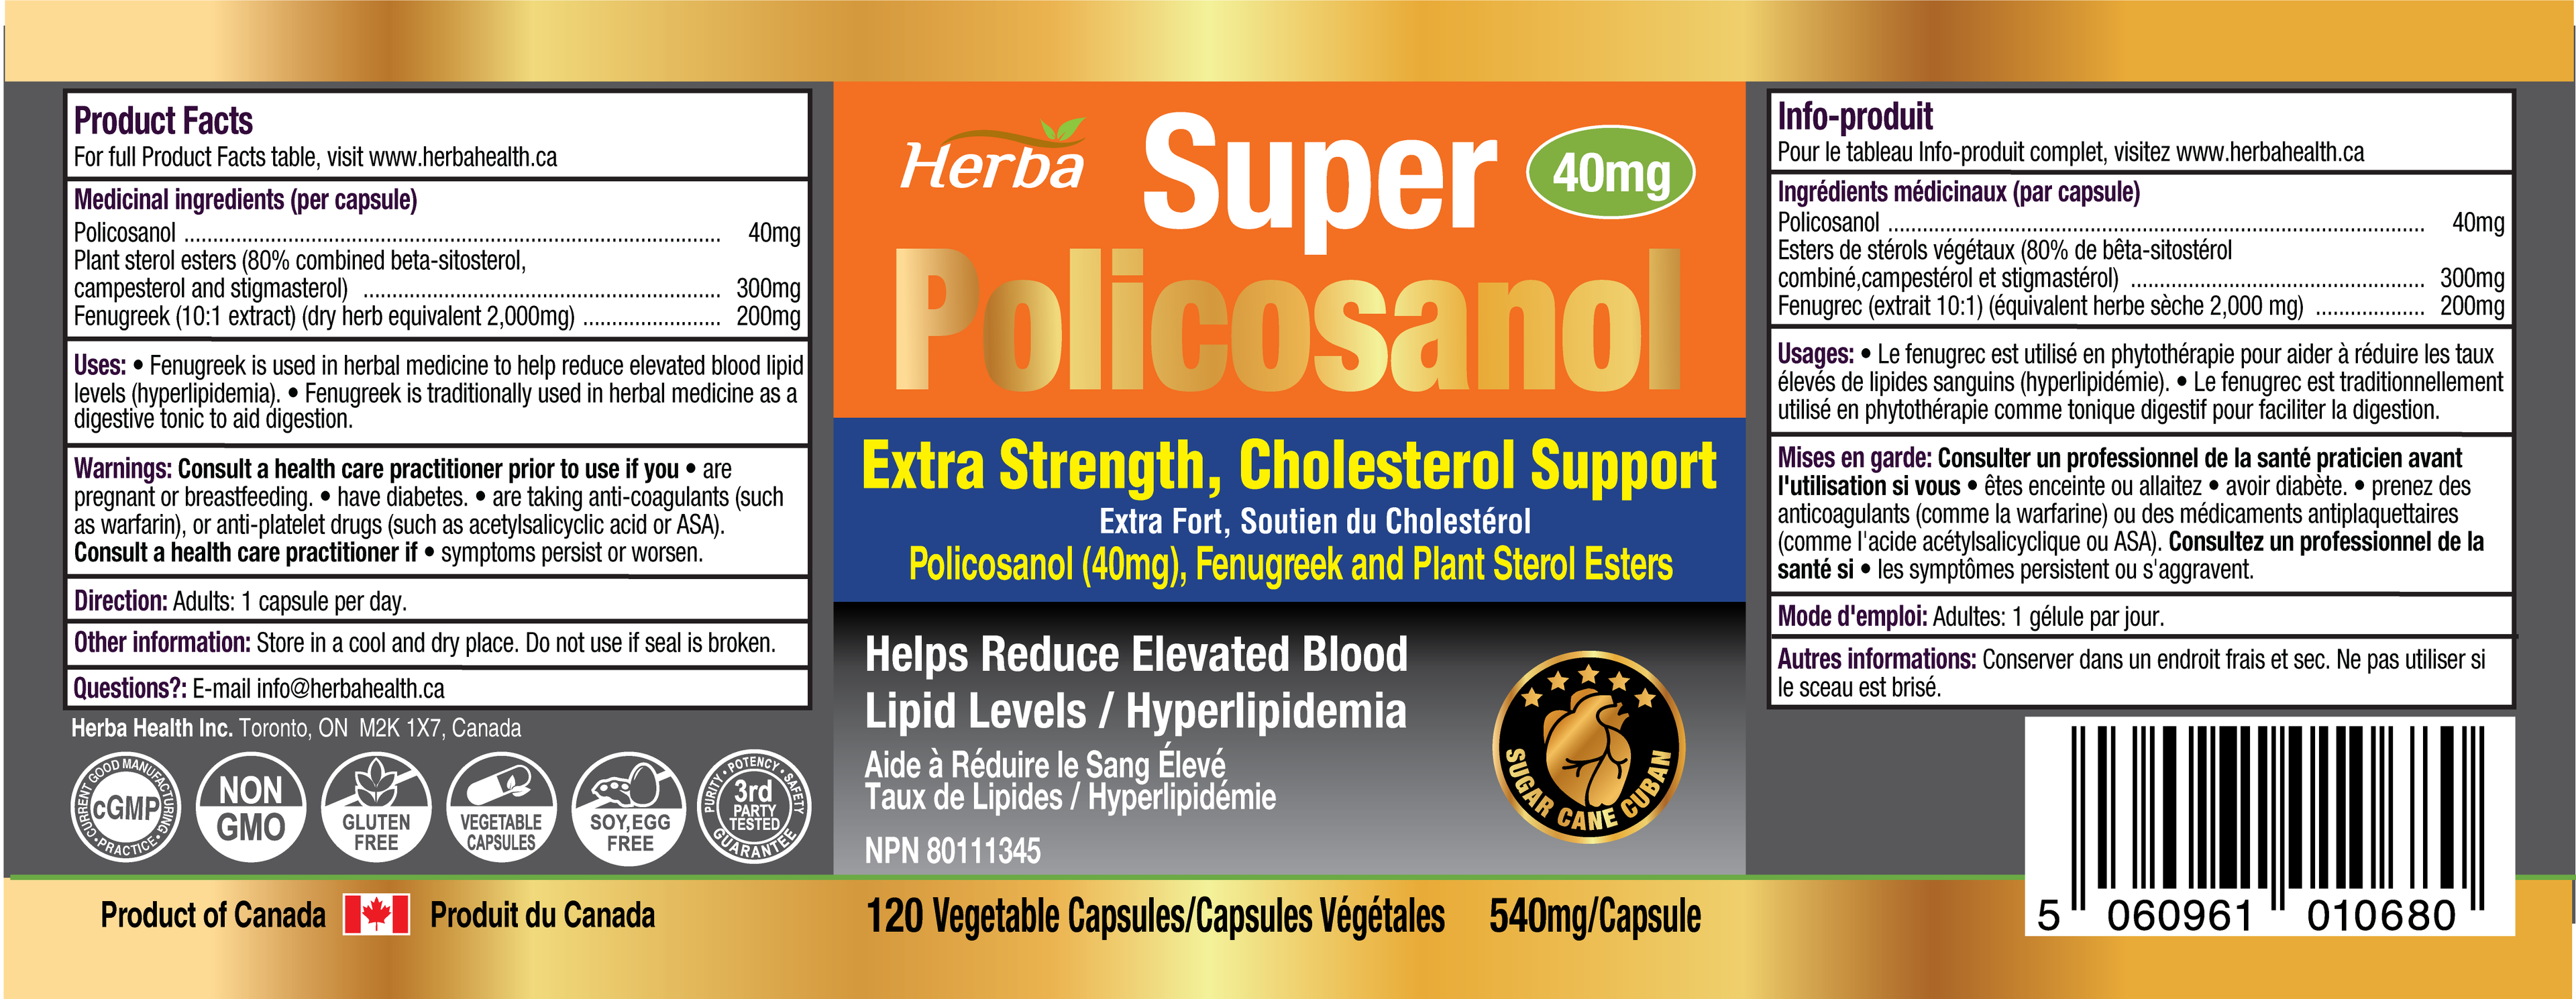 Herba Policosanol 40mg with Fenugreek and Plant Sterol Esters - 120 Vegetable Capsules